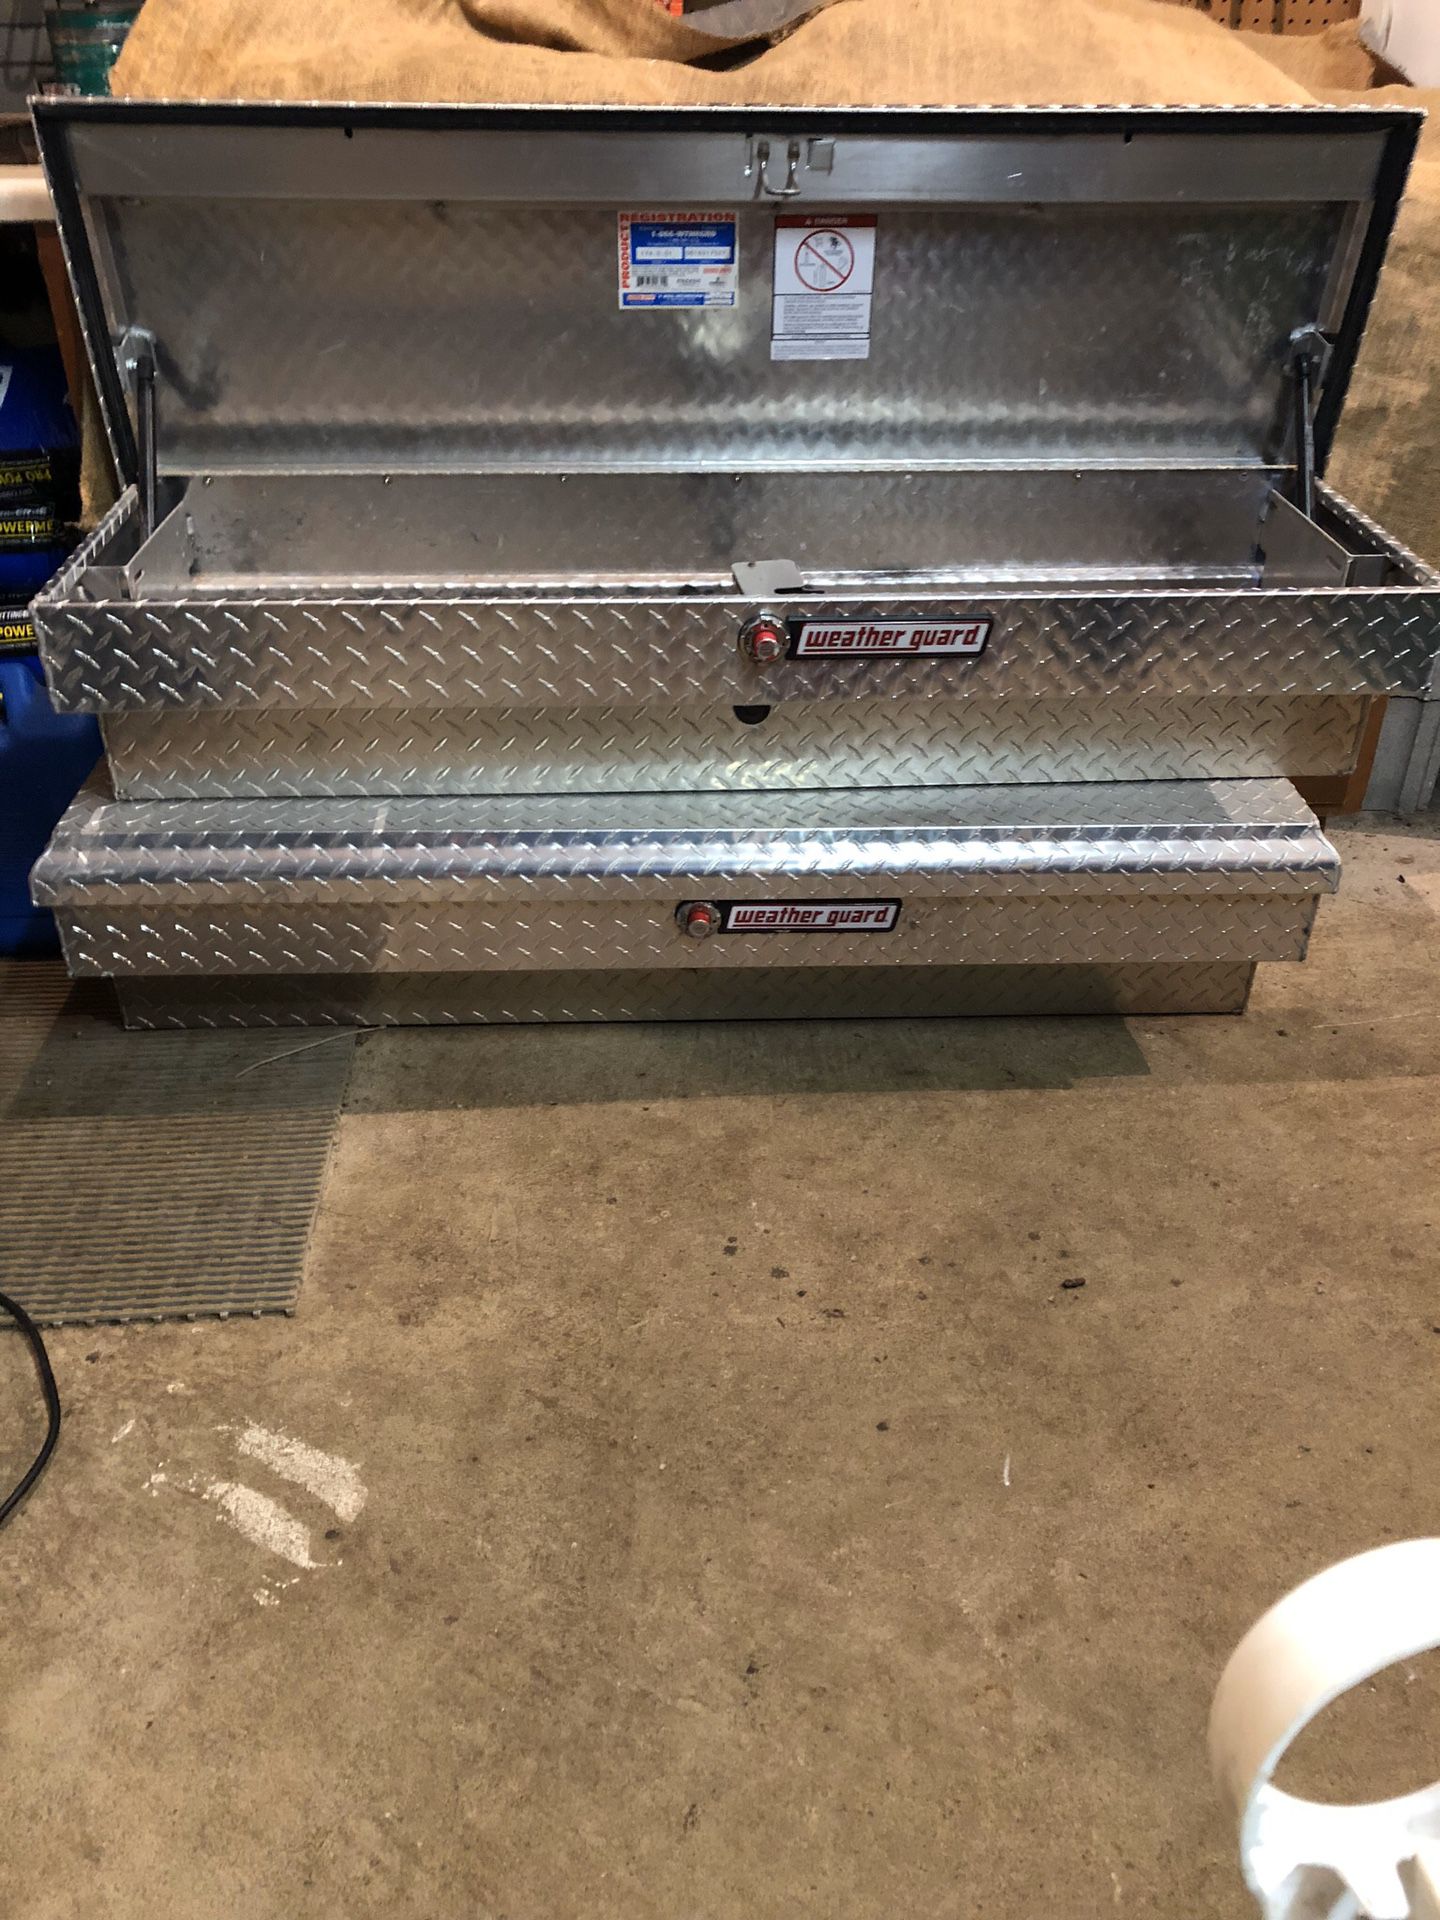 Aluminum side toolboxes by Weatherguard!